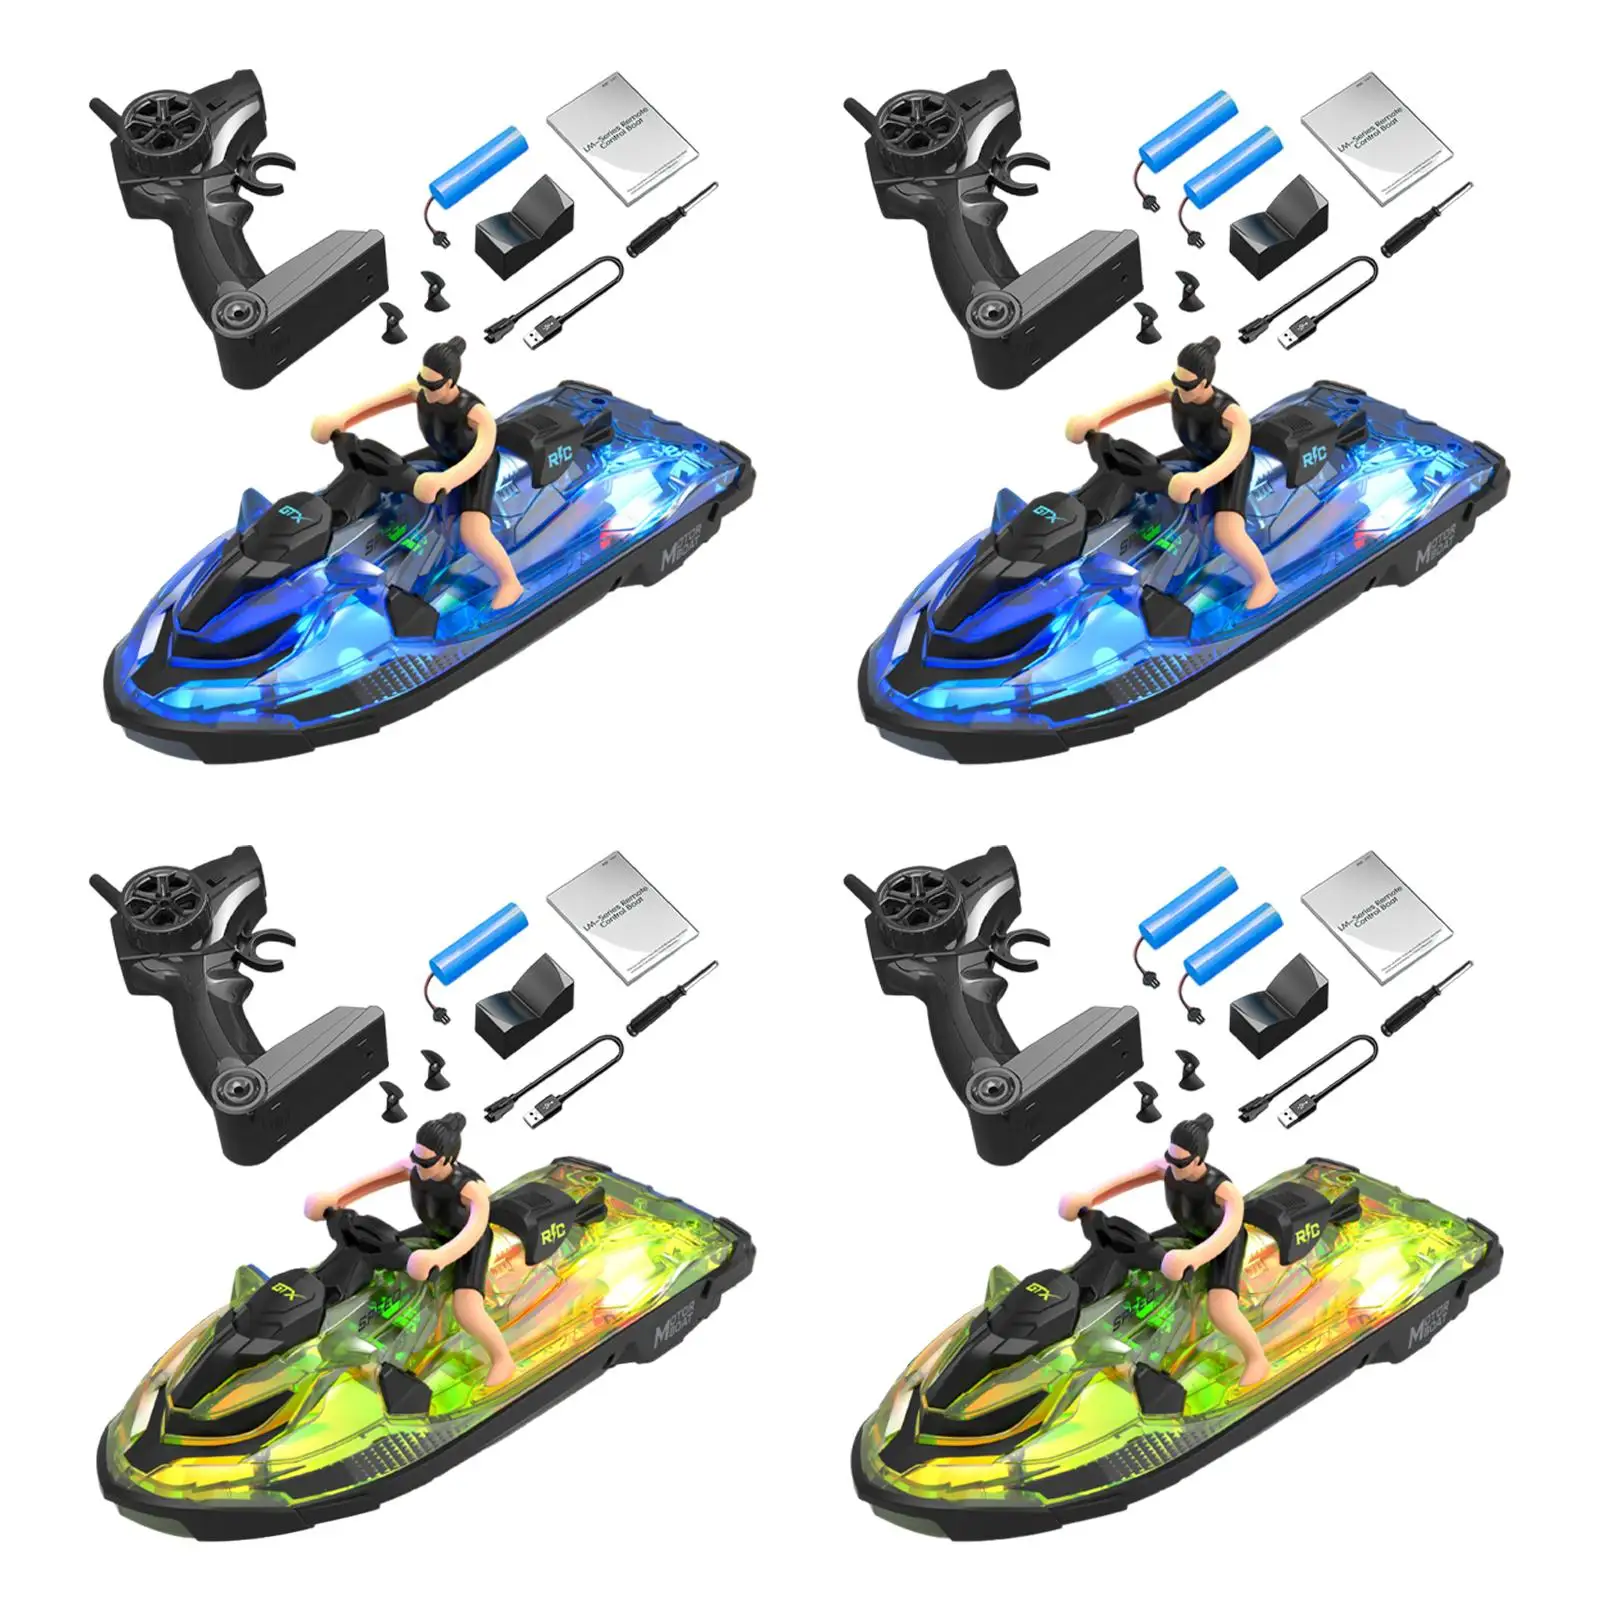 RC Boat Ship Toy Simulation with Light 2 Gears Speed Adjustment Flexible Fast Remote Control Boat for Girls Boys Adults Gifts